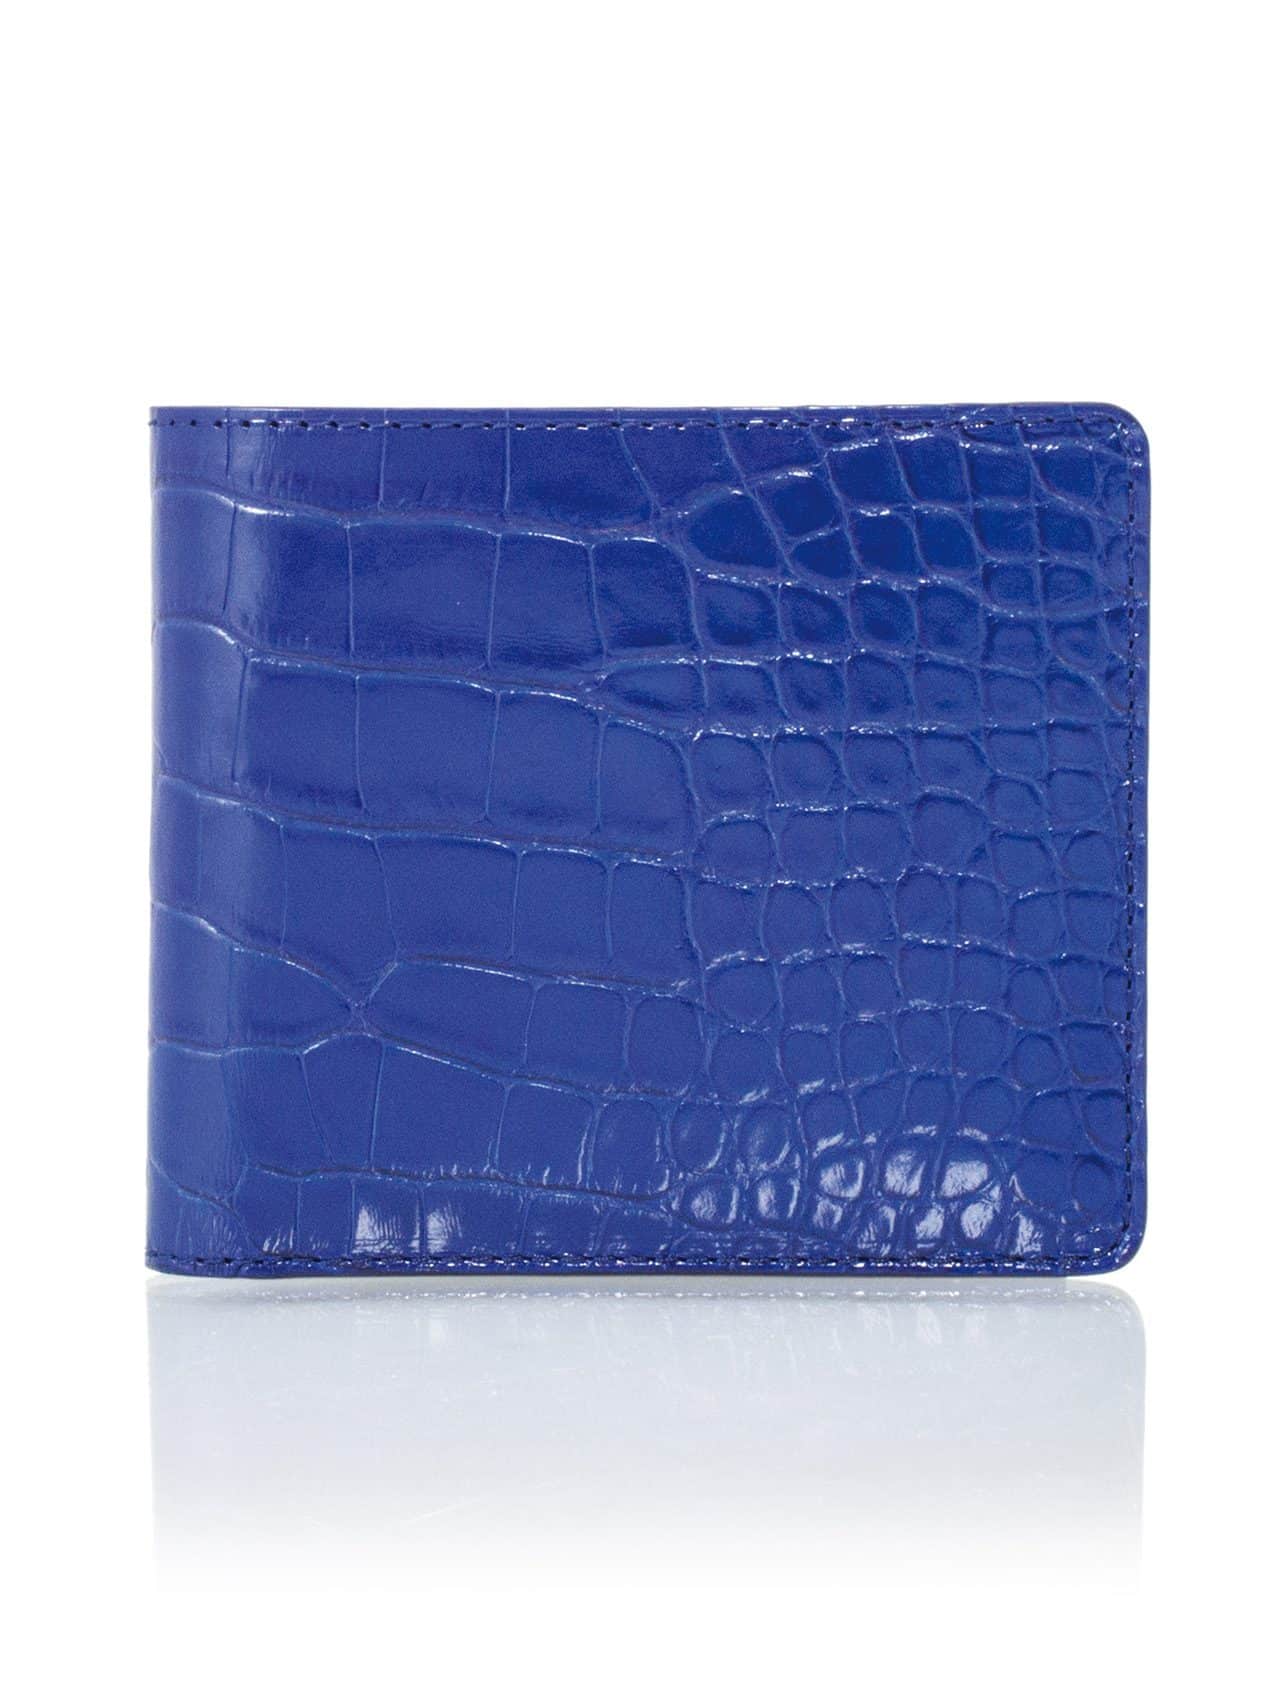 Bags & Purses Wallets & Money Clips Wallets Made in USA gator wallet Bifold Alligator wallet with blue-steel color thread 